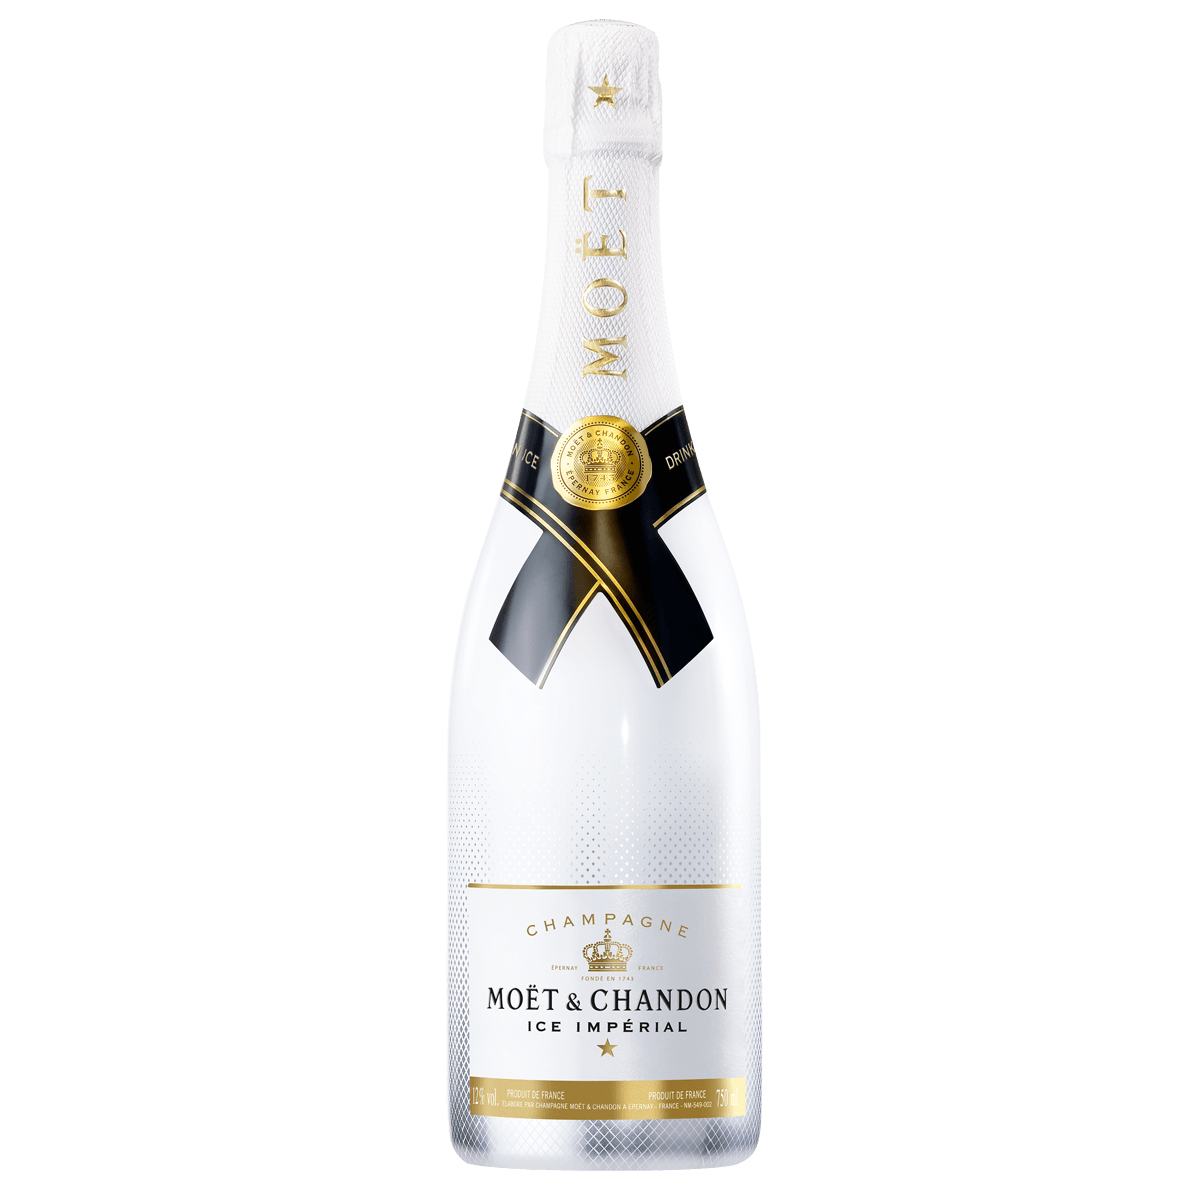 MOET & CHANDON Champagne Ice Impérial 0,75L EW